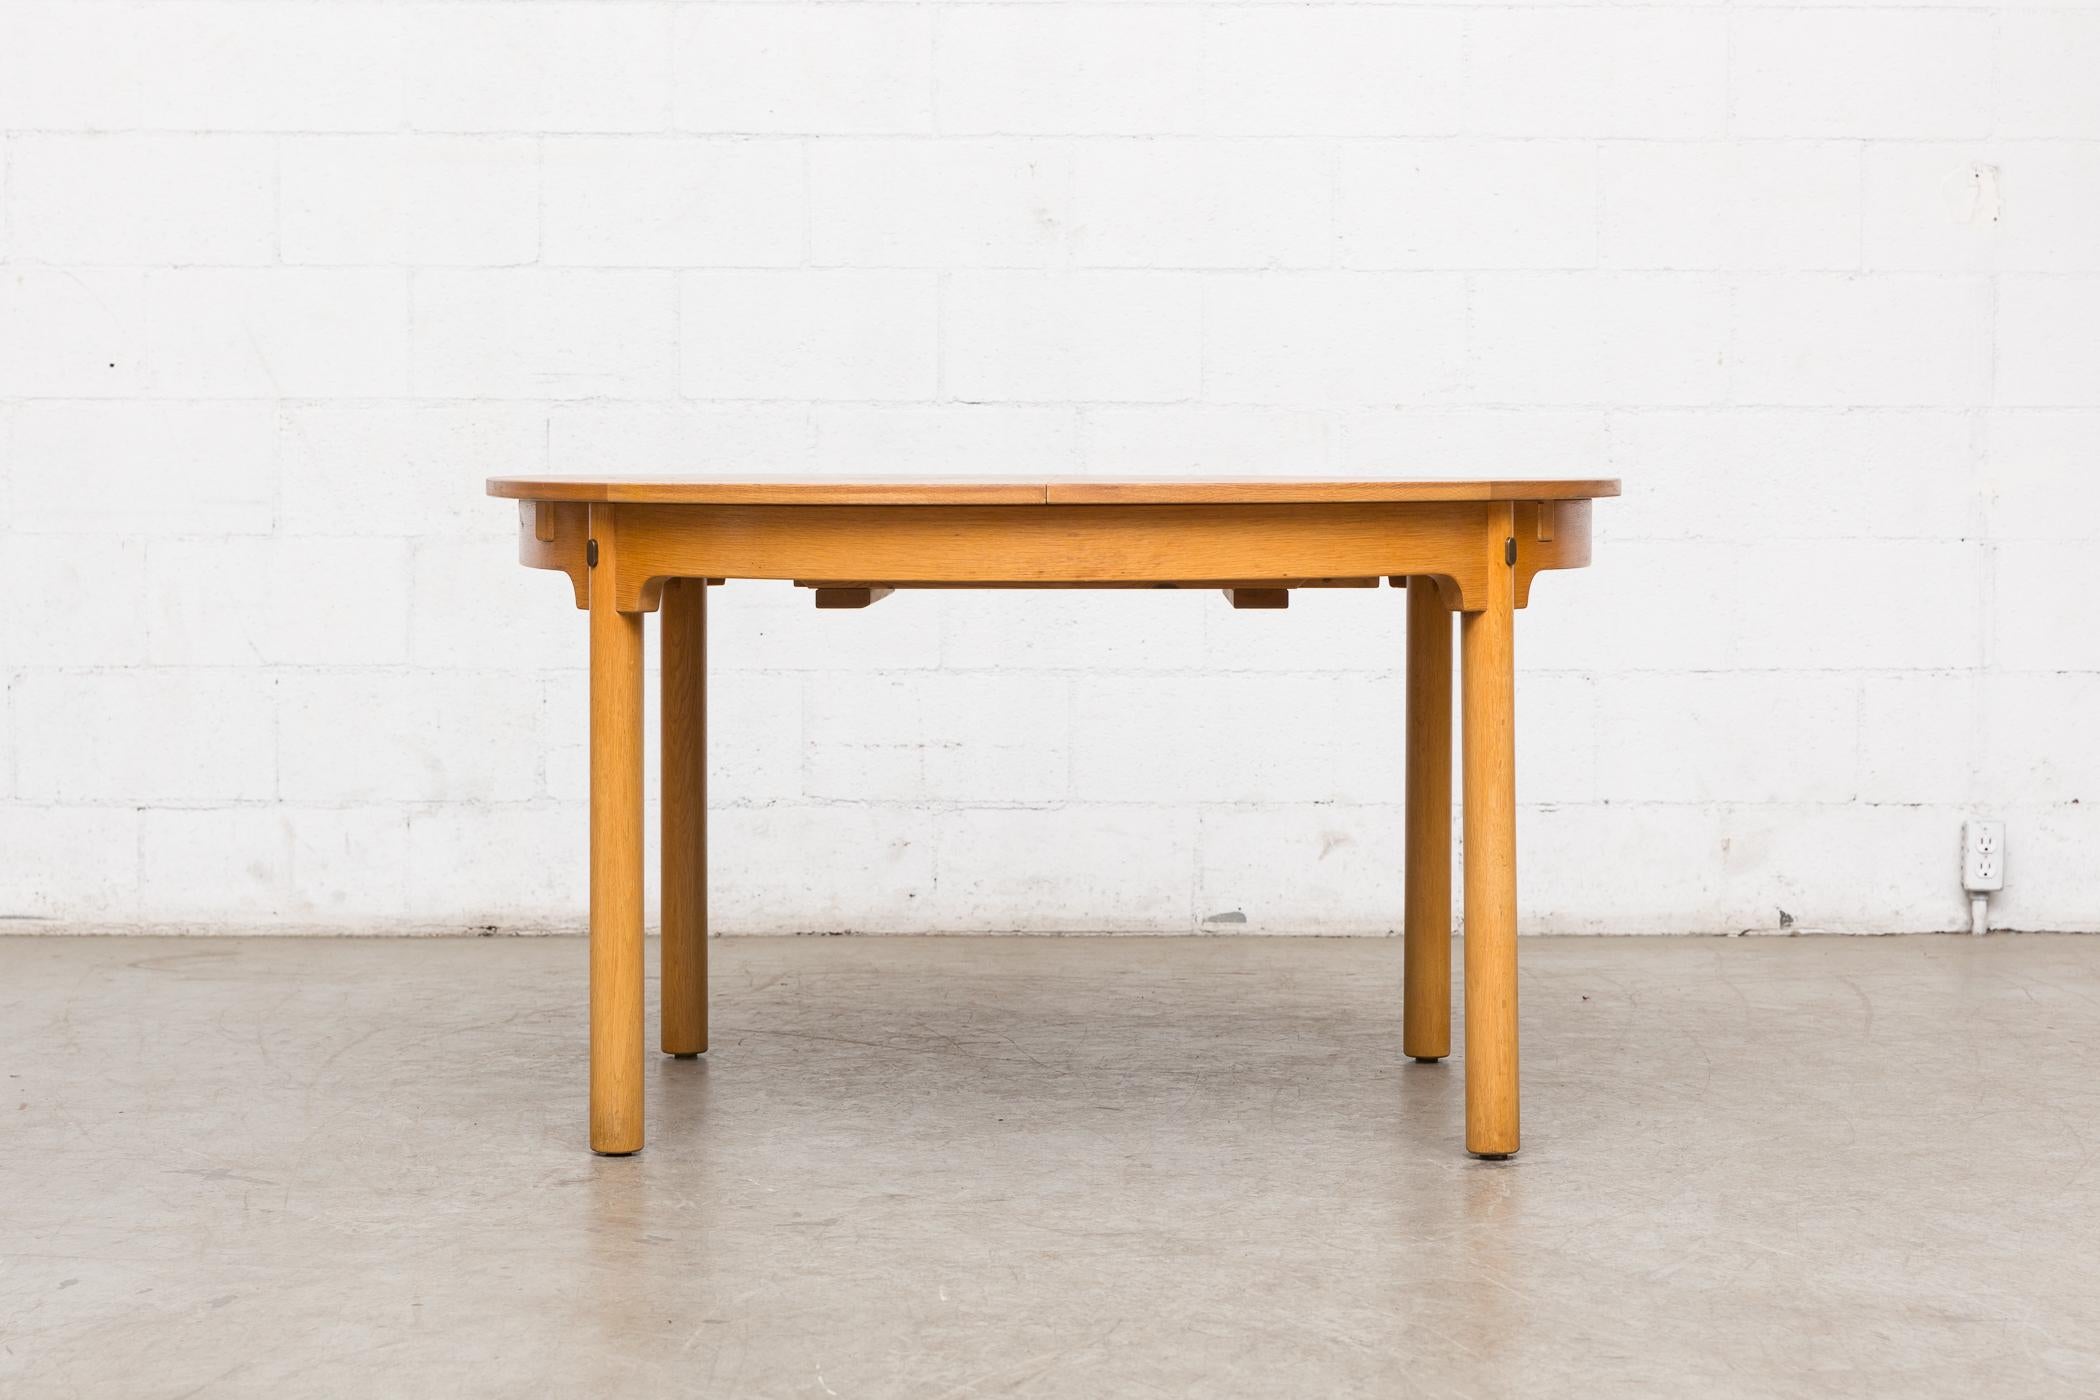 Børge Mogensen Karl Andersson & Söner Øresund round oak dining table with 2 hidden leaves. The leaves have exposed hinges and the table extends to 85